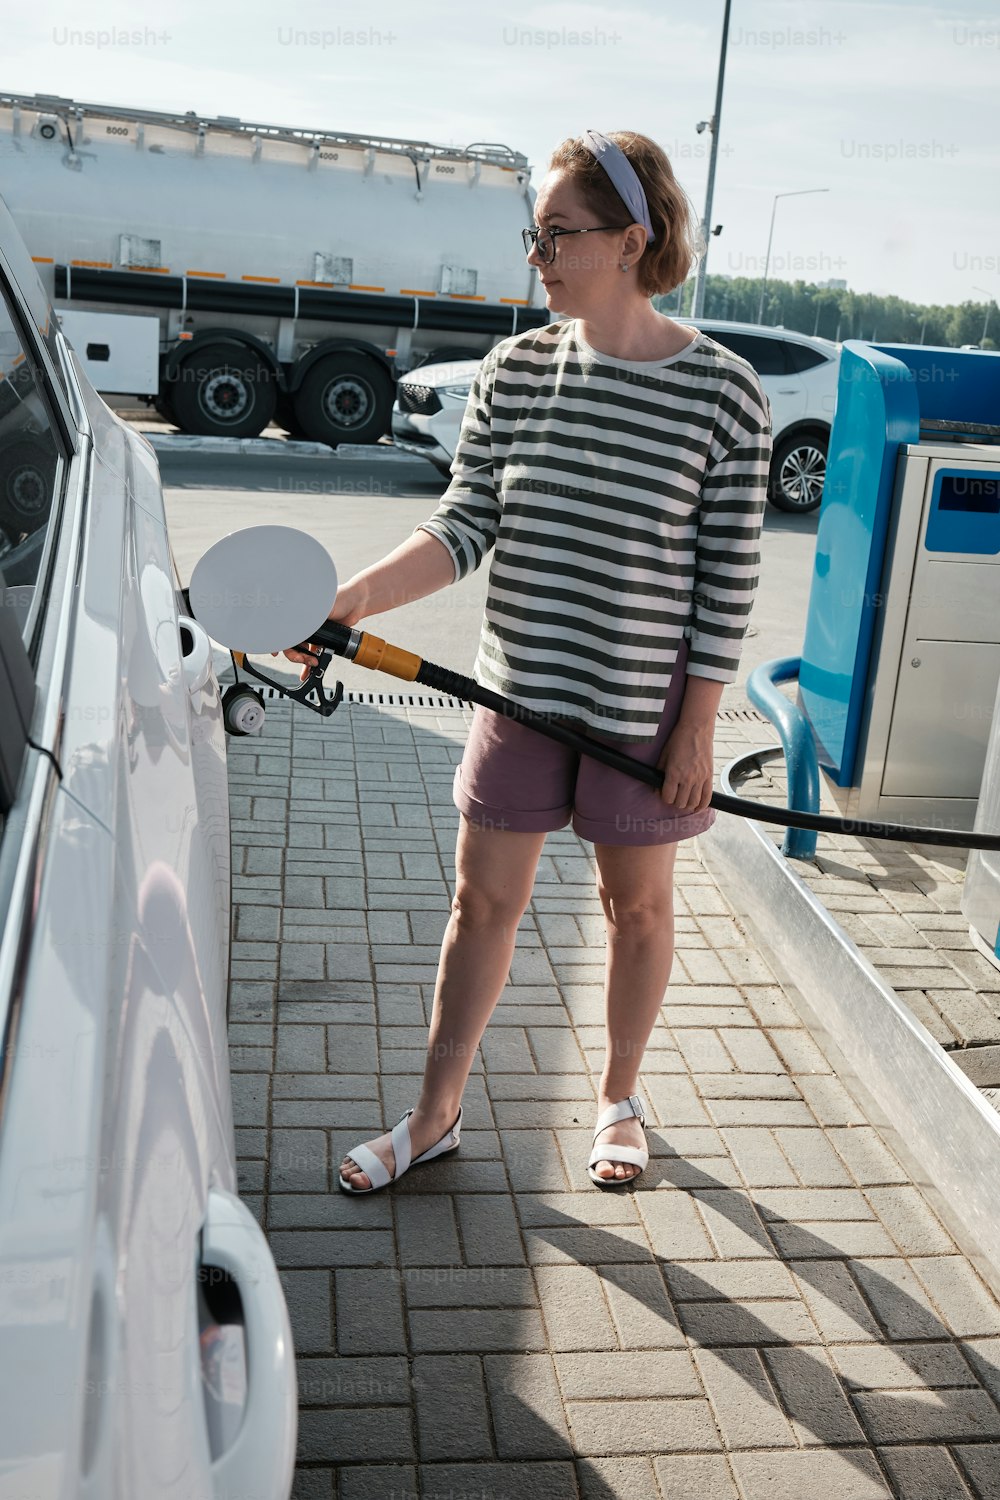 a woman pumping gas into her car at a gas station